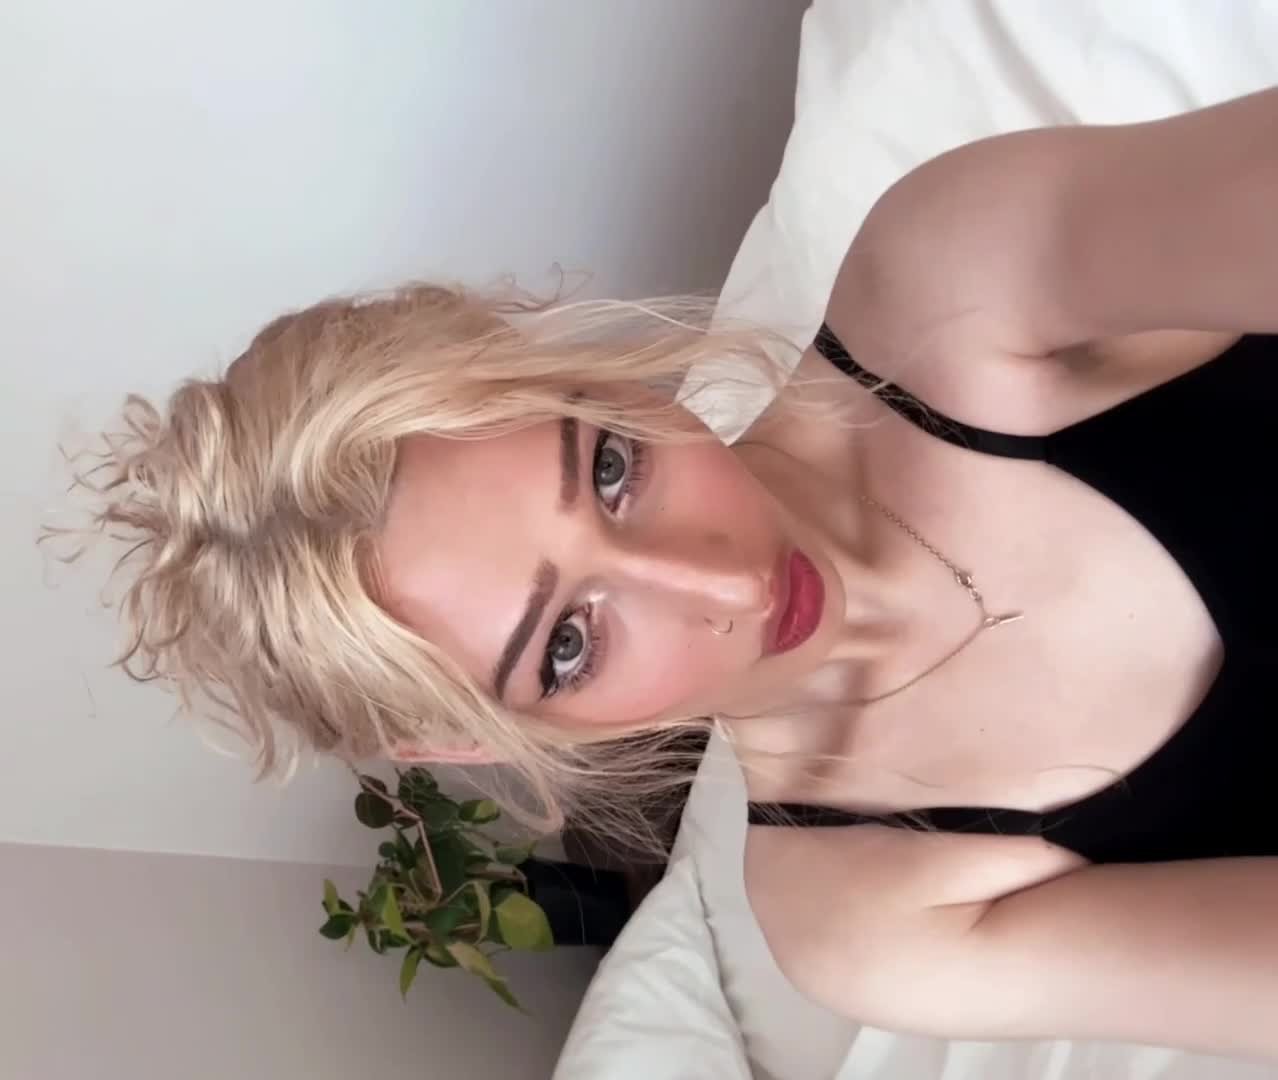 Video post by stormyrae